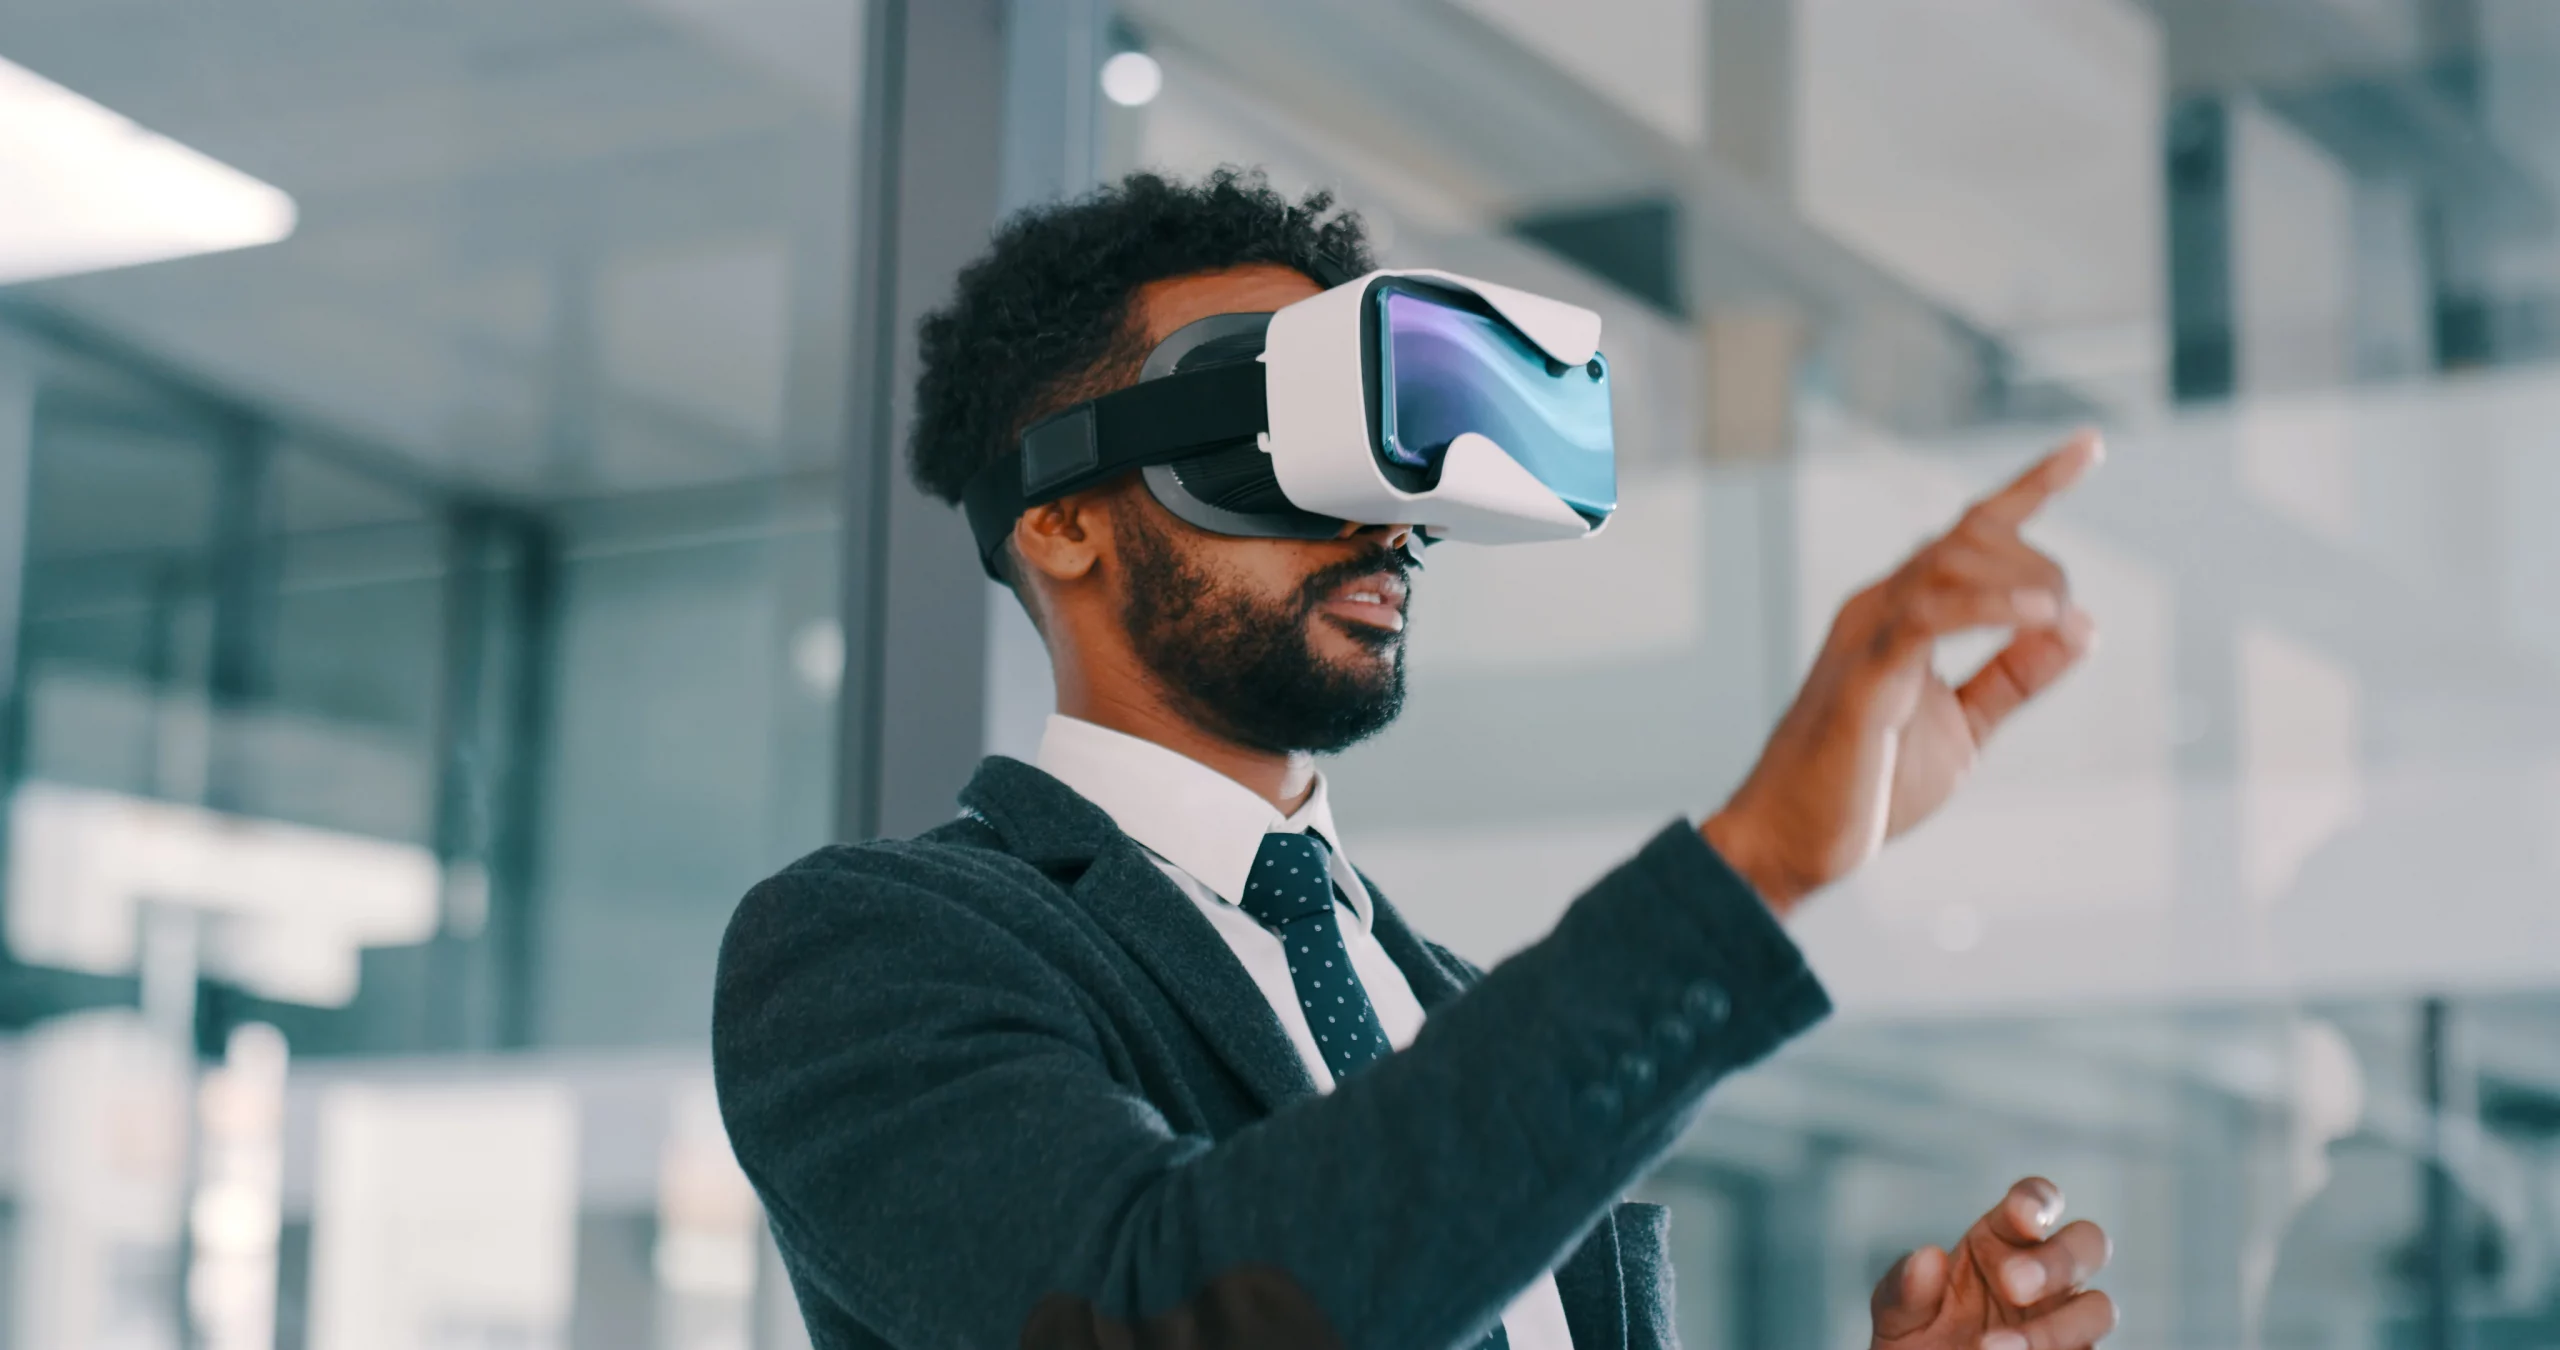 Immersive VR content for business executives